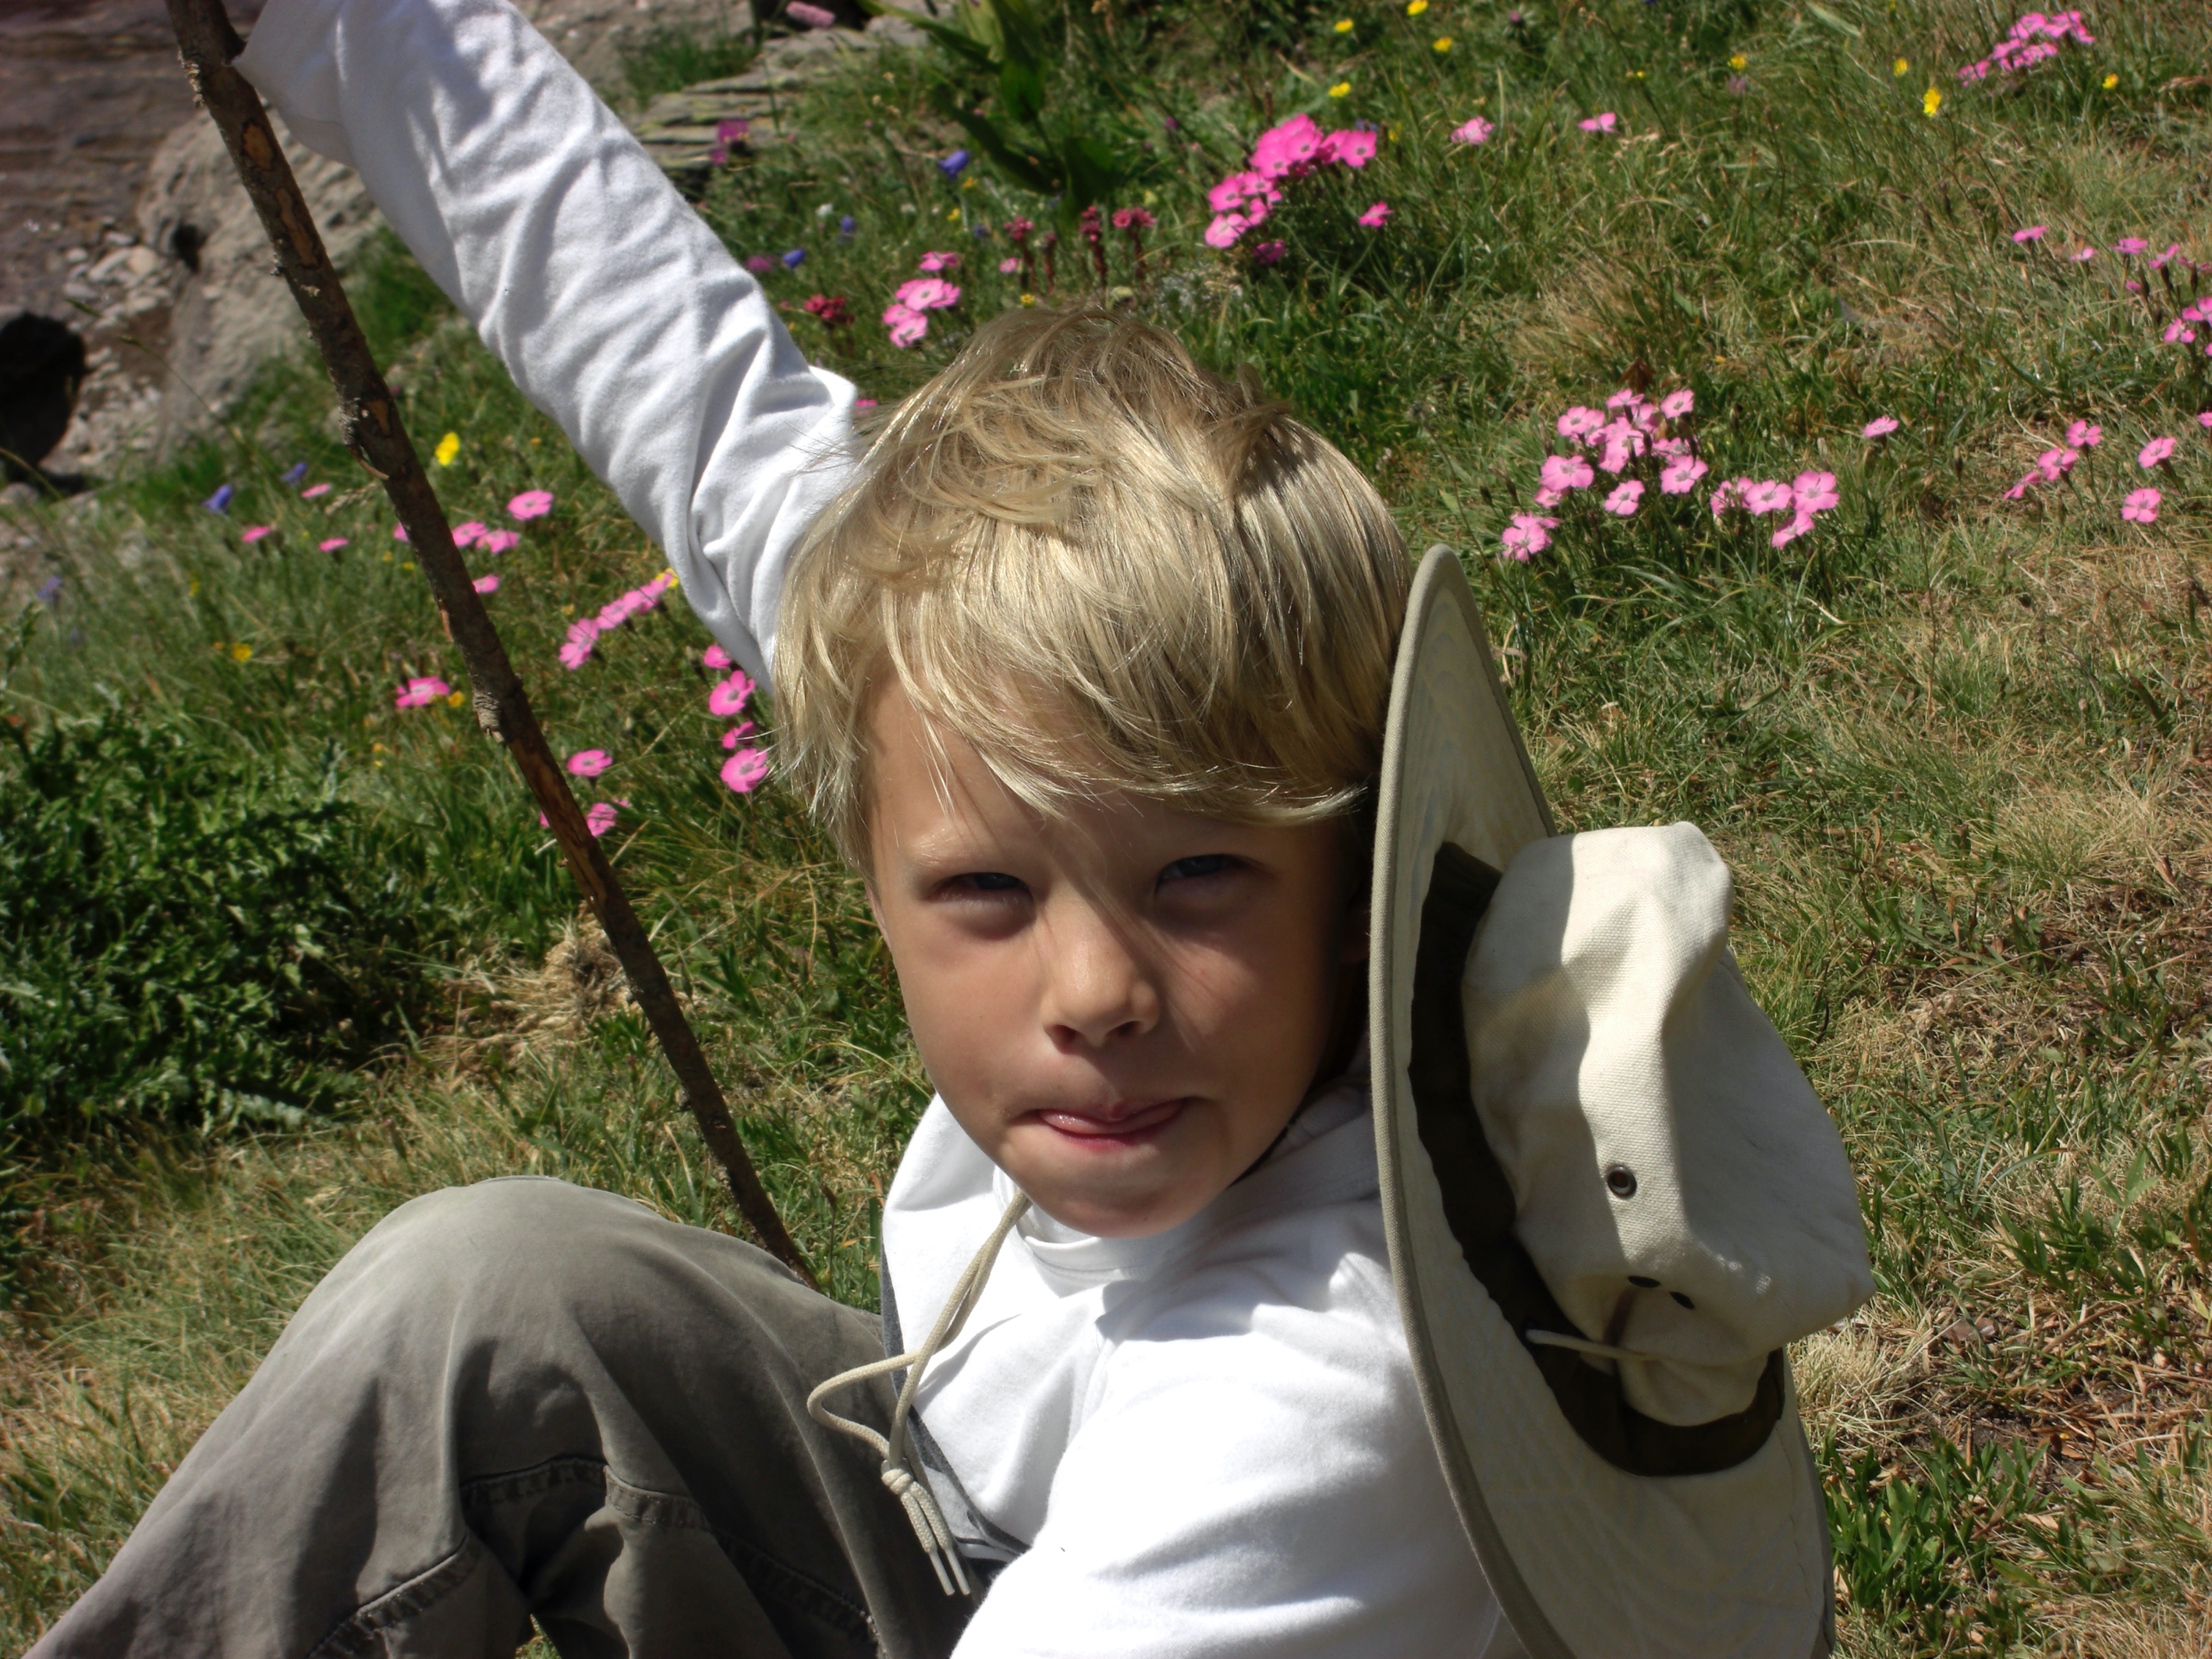 A child that is standing in the grass

Description automatically generated